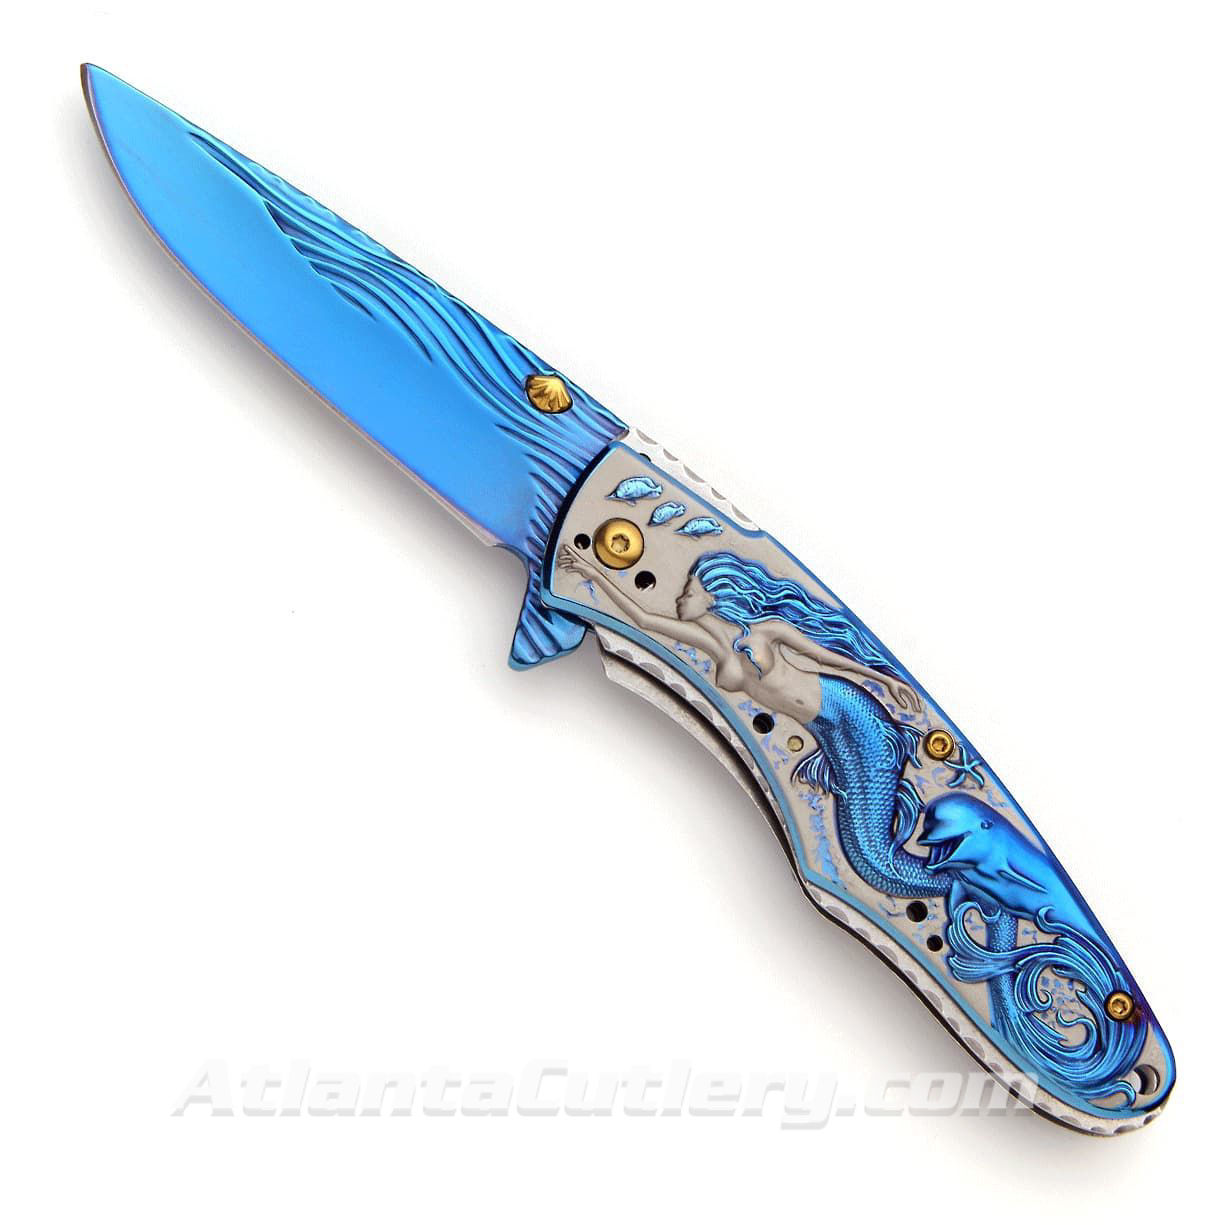 Underwater Wonderland Swimming Mermaid Folder has anodized blue coating on the blade, jimped liners, wave patterns on stainless steel blade